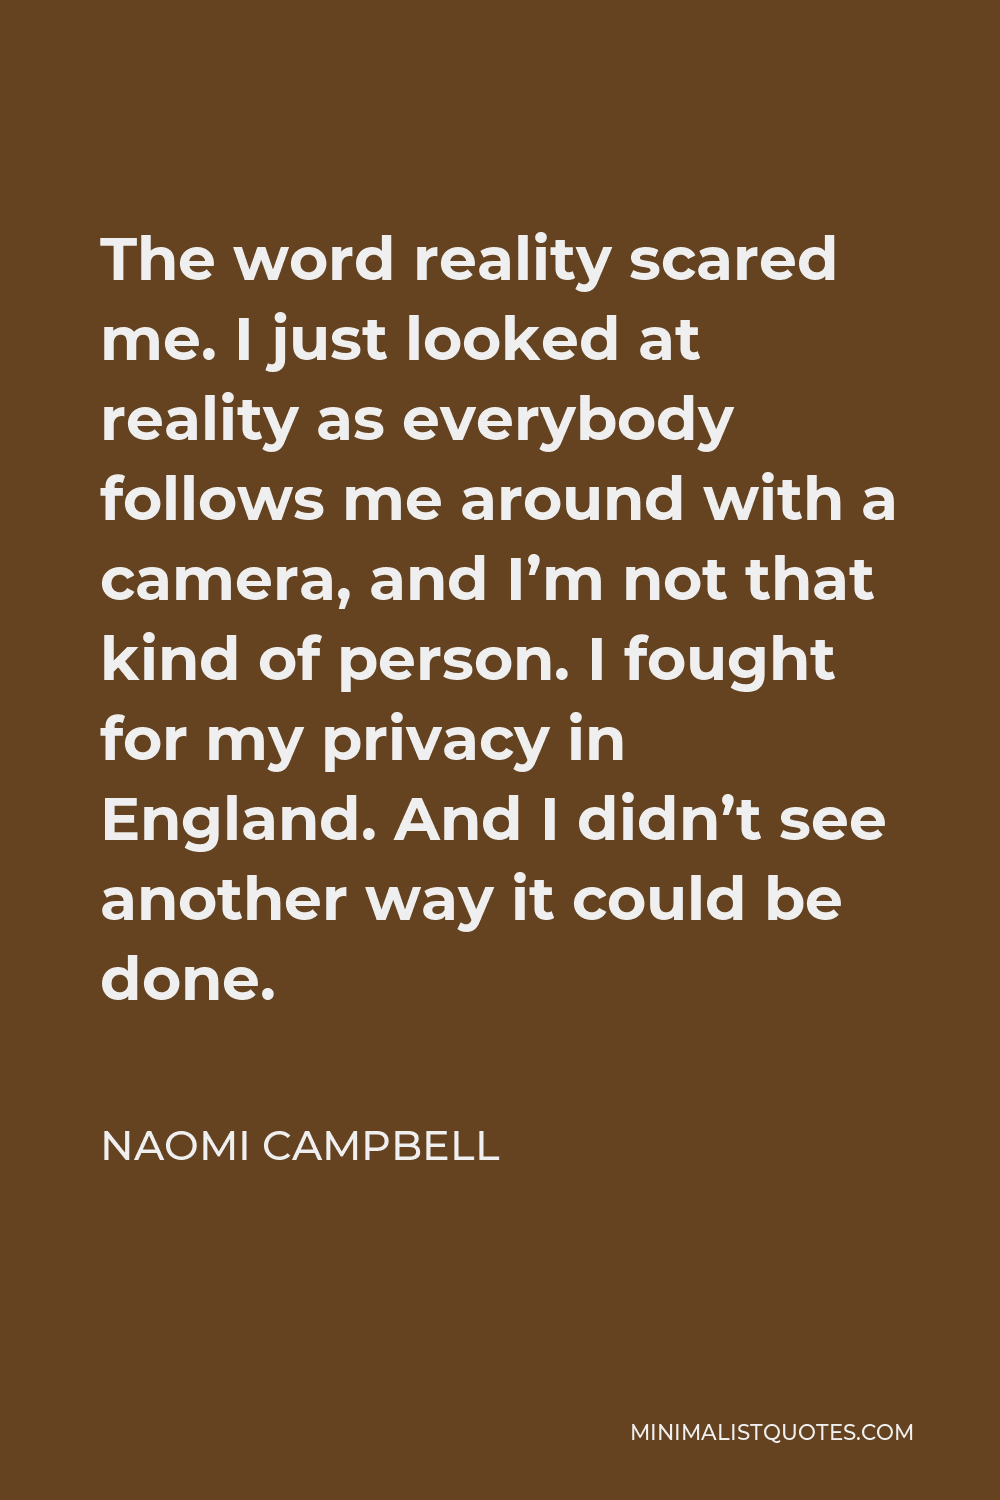 Naomi Campbell Quote - The word reality scared me. I just looked at reality as everybody follows me around with a camera, and I’m not that kind of person. I fought for my privacy in England. And I didn’t see another way it could be done.